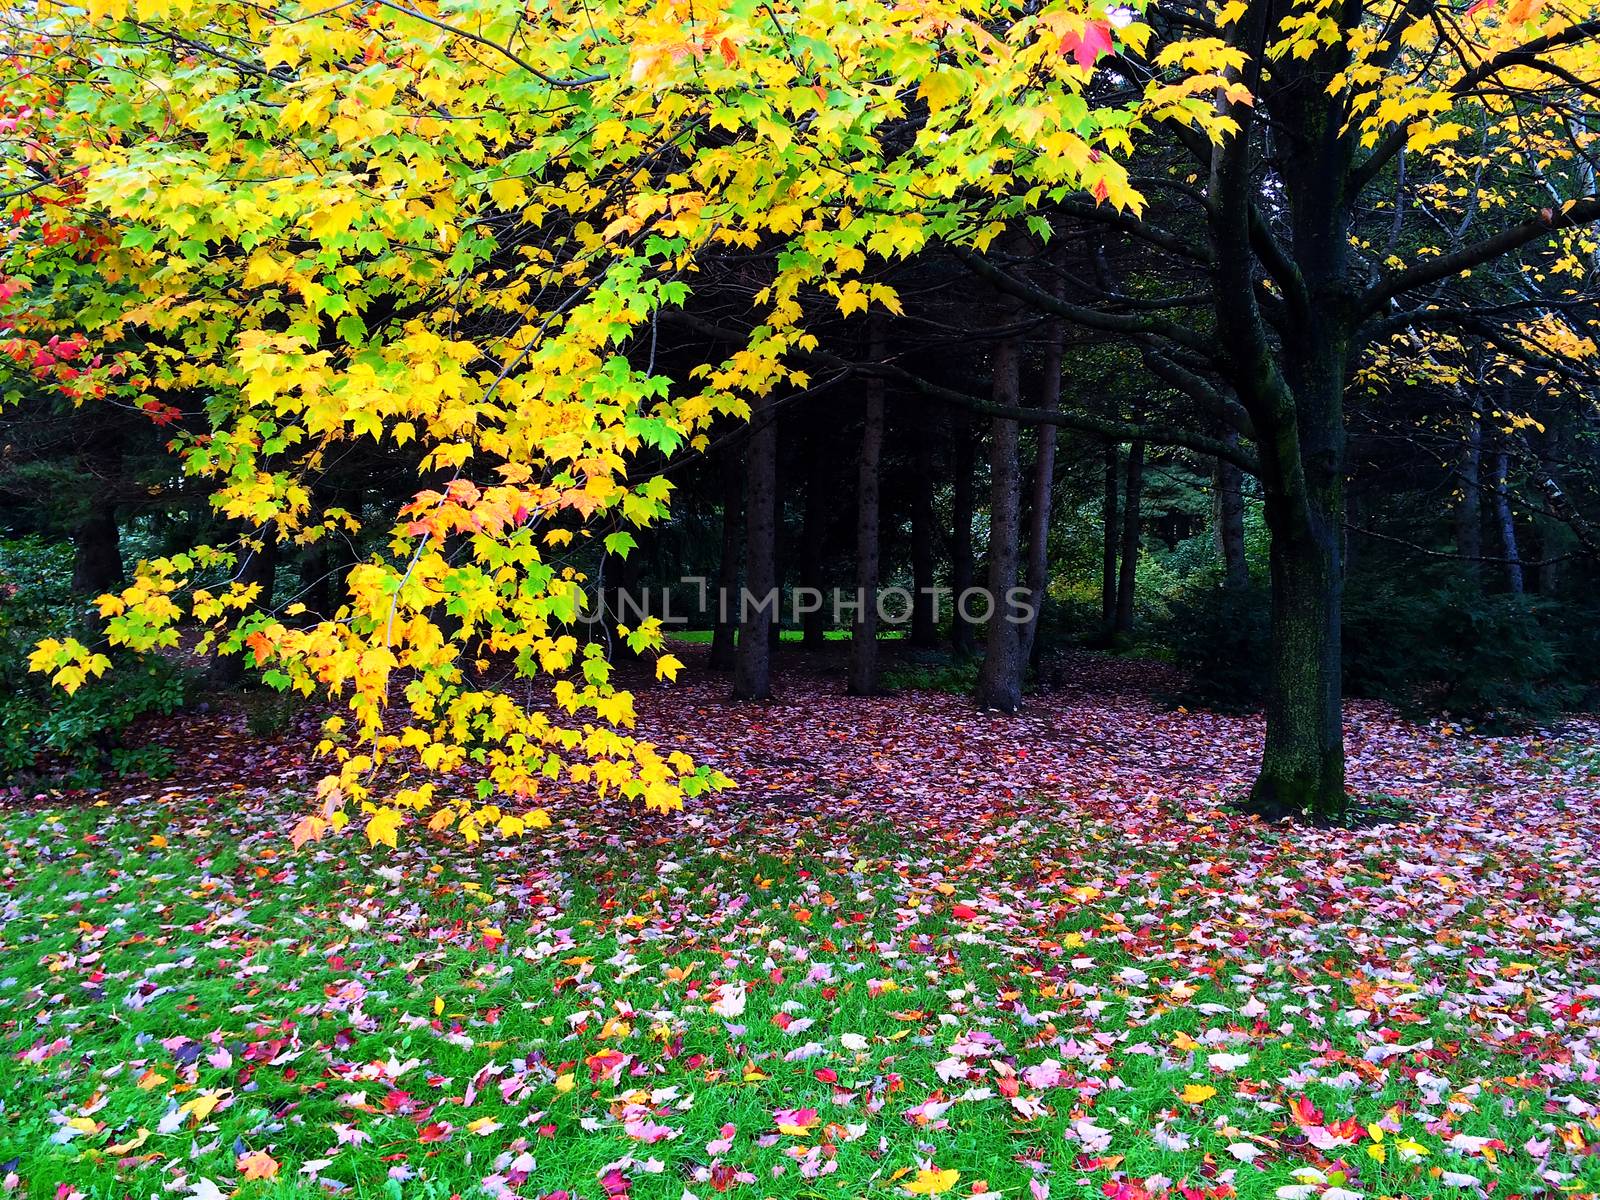 Autumn trees and green lawn covered with fallen leaves. Quebec, Canada.